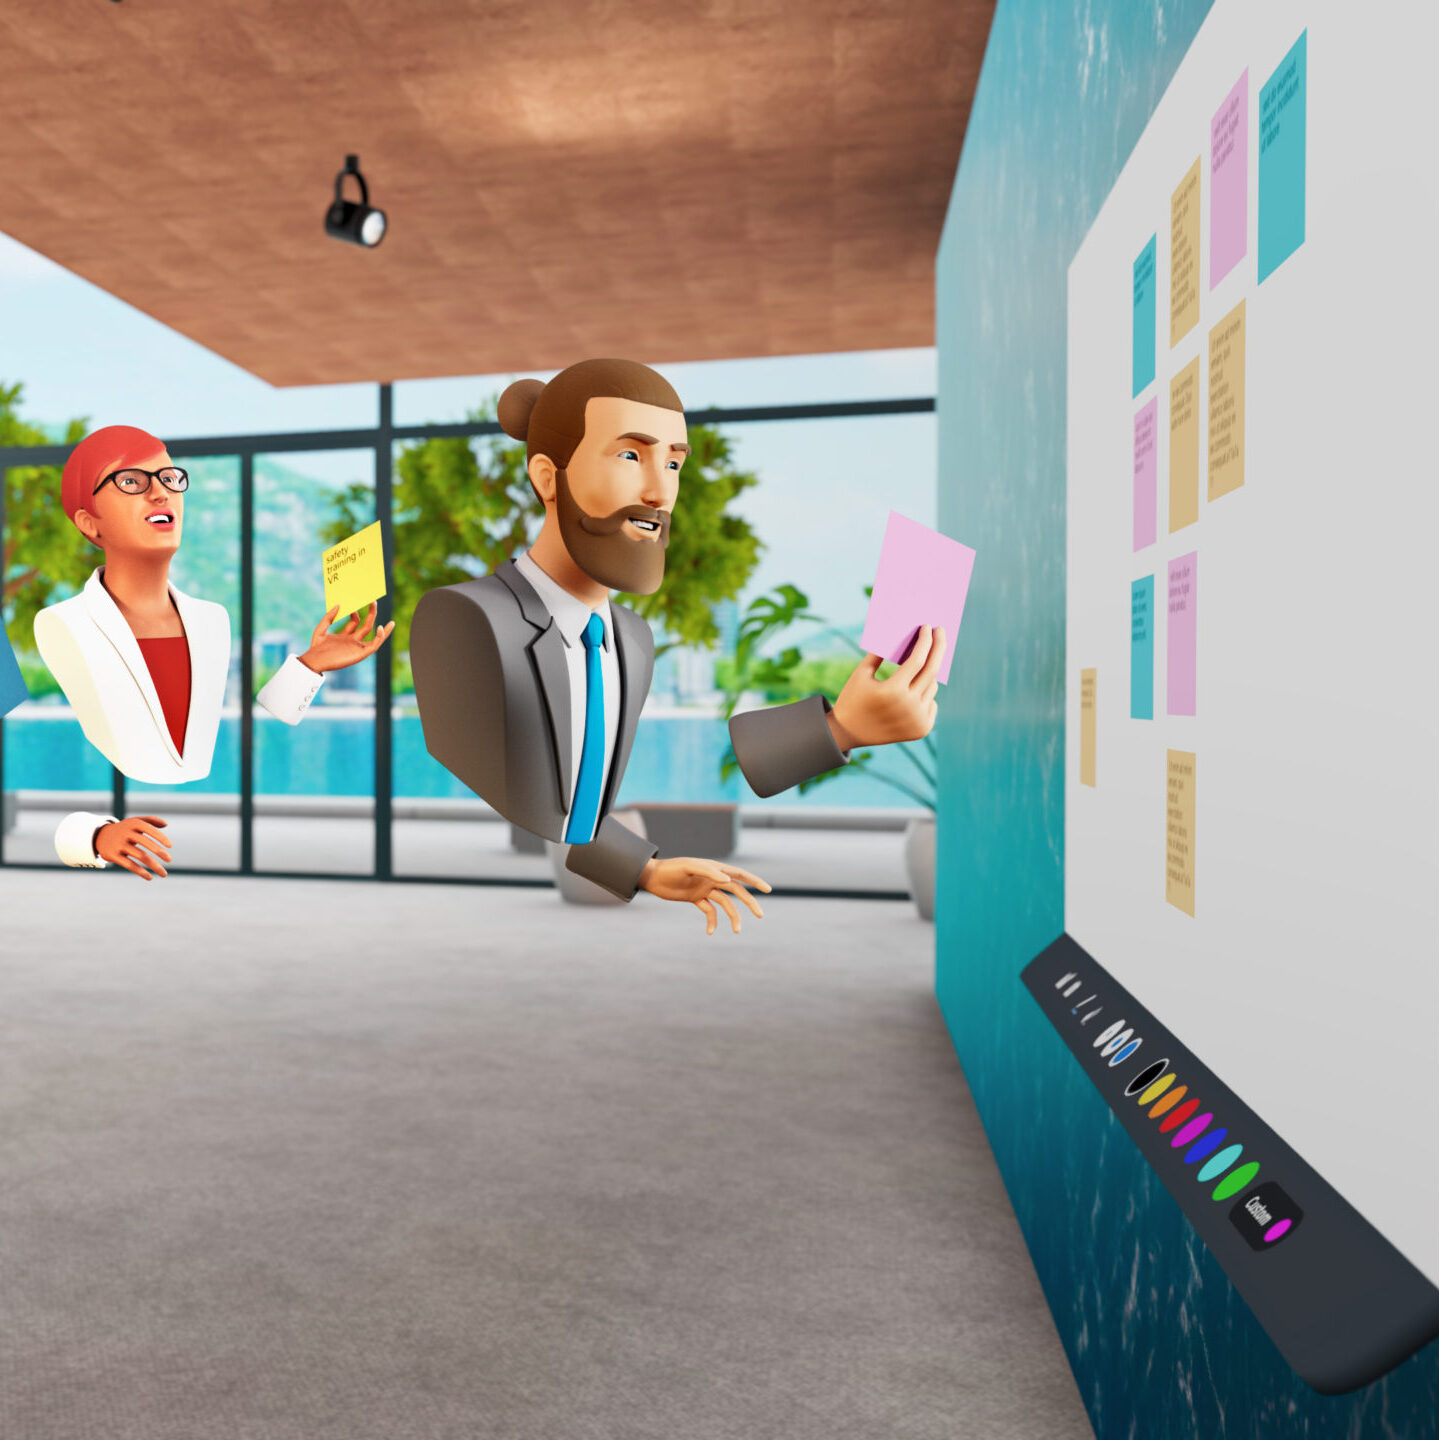 upper body glue avatars collaborating remotely in a virtual office